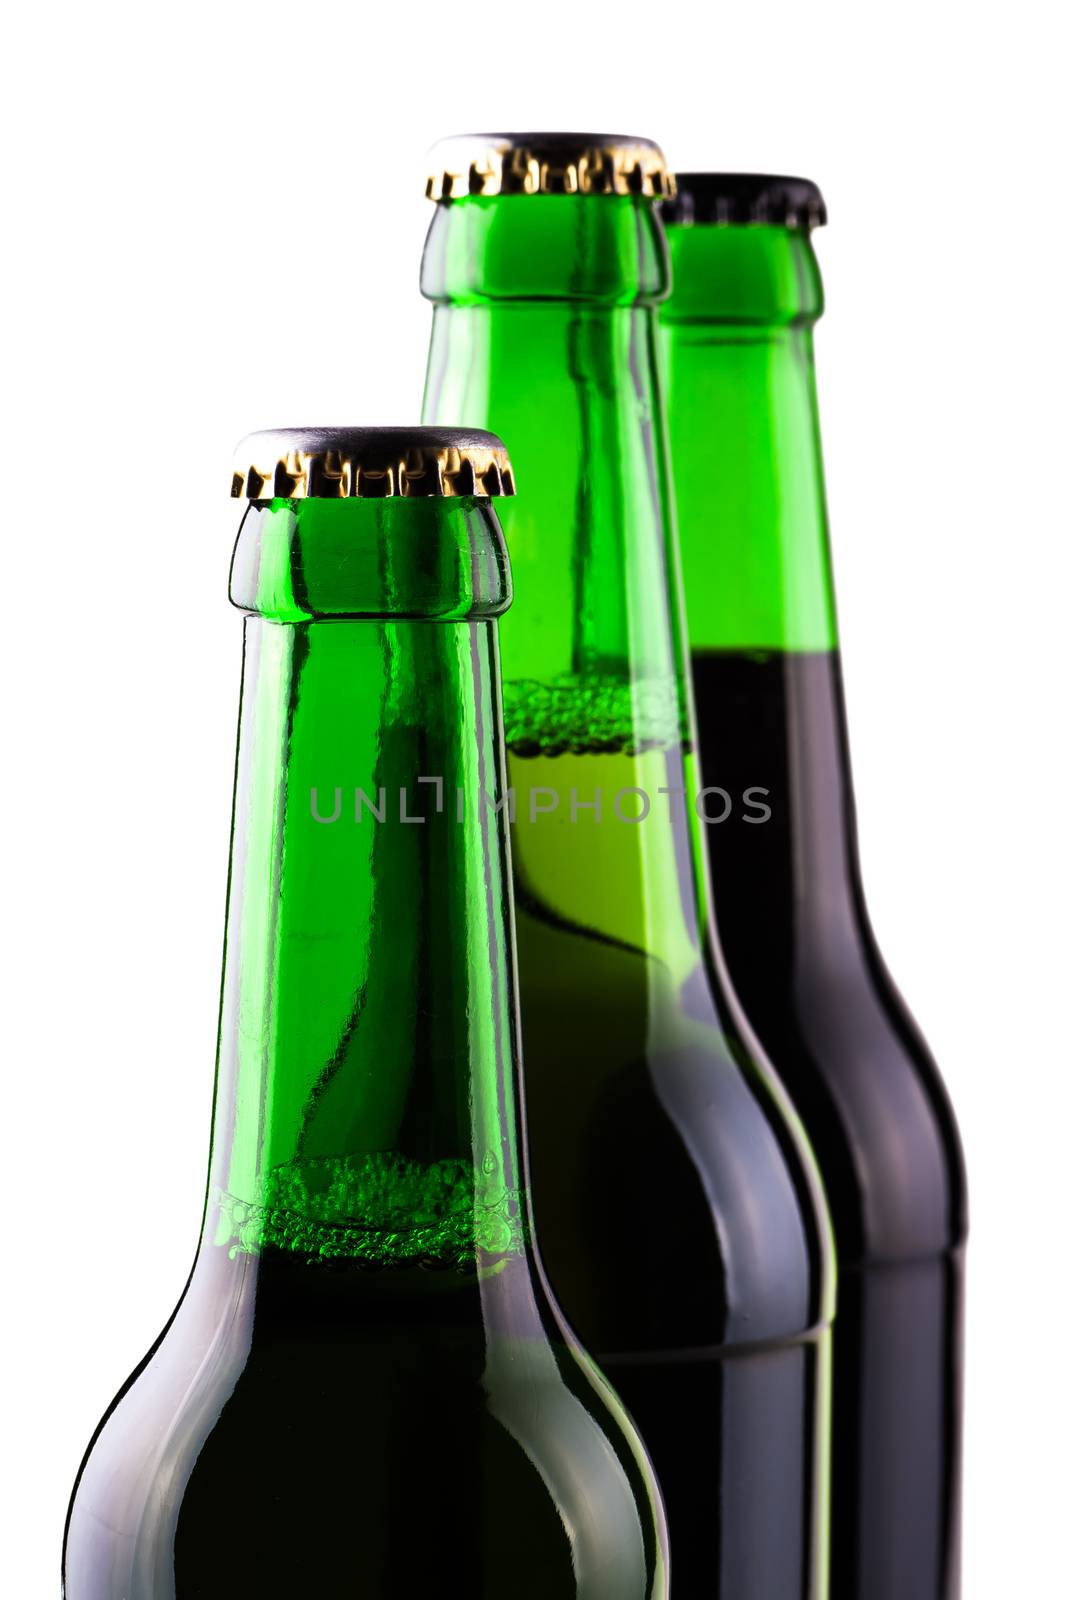 beer in glass bottles close-up isolated on white background